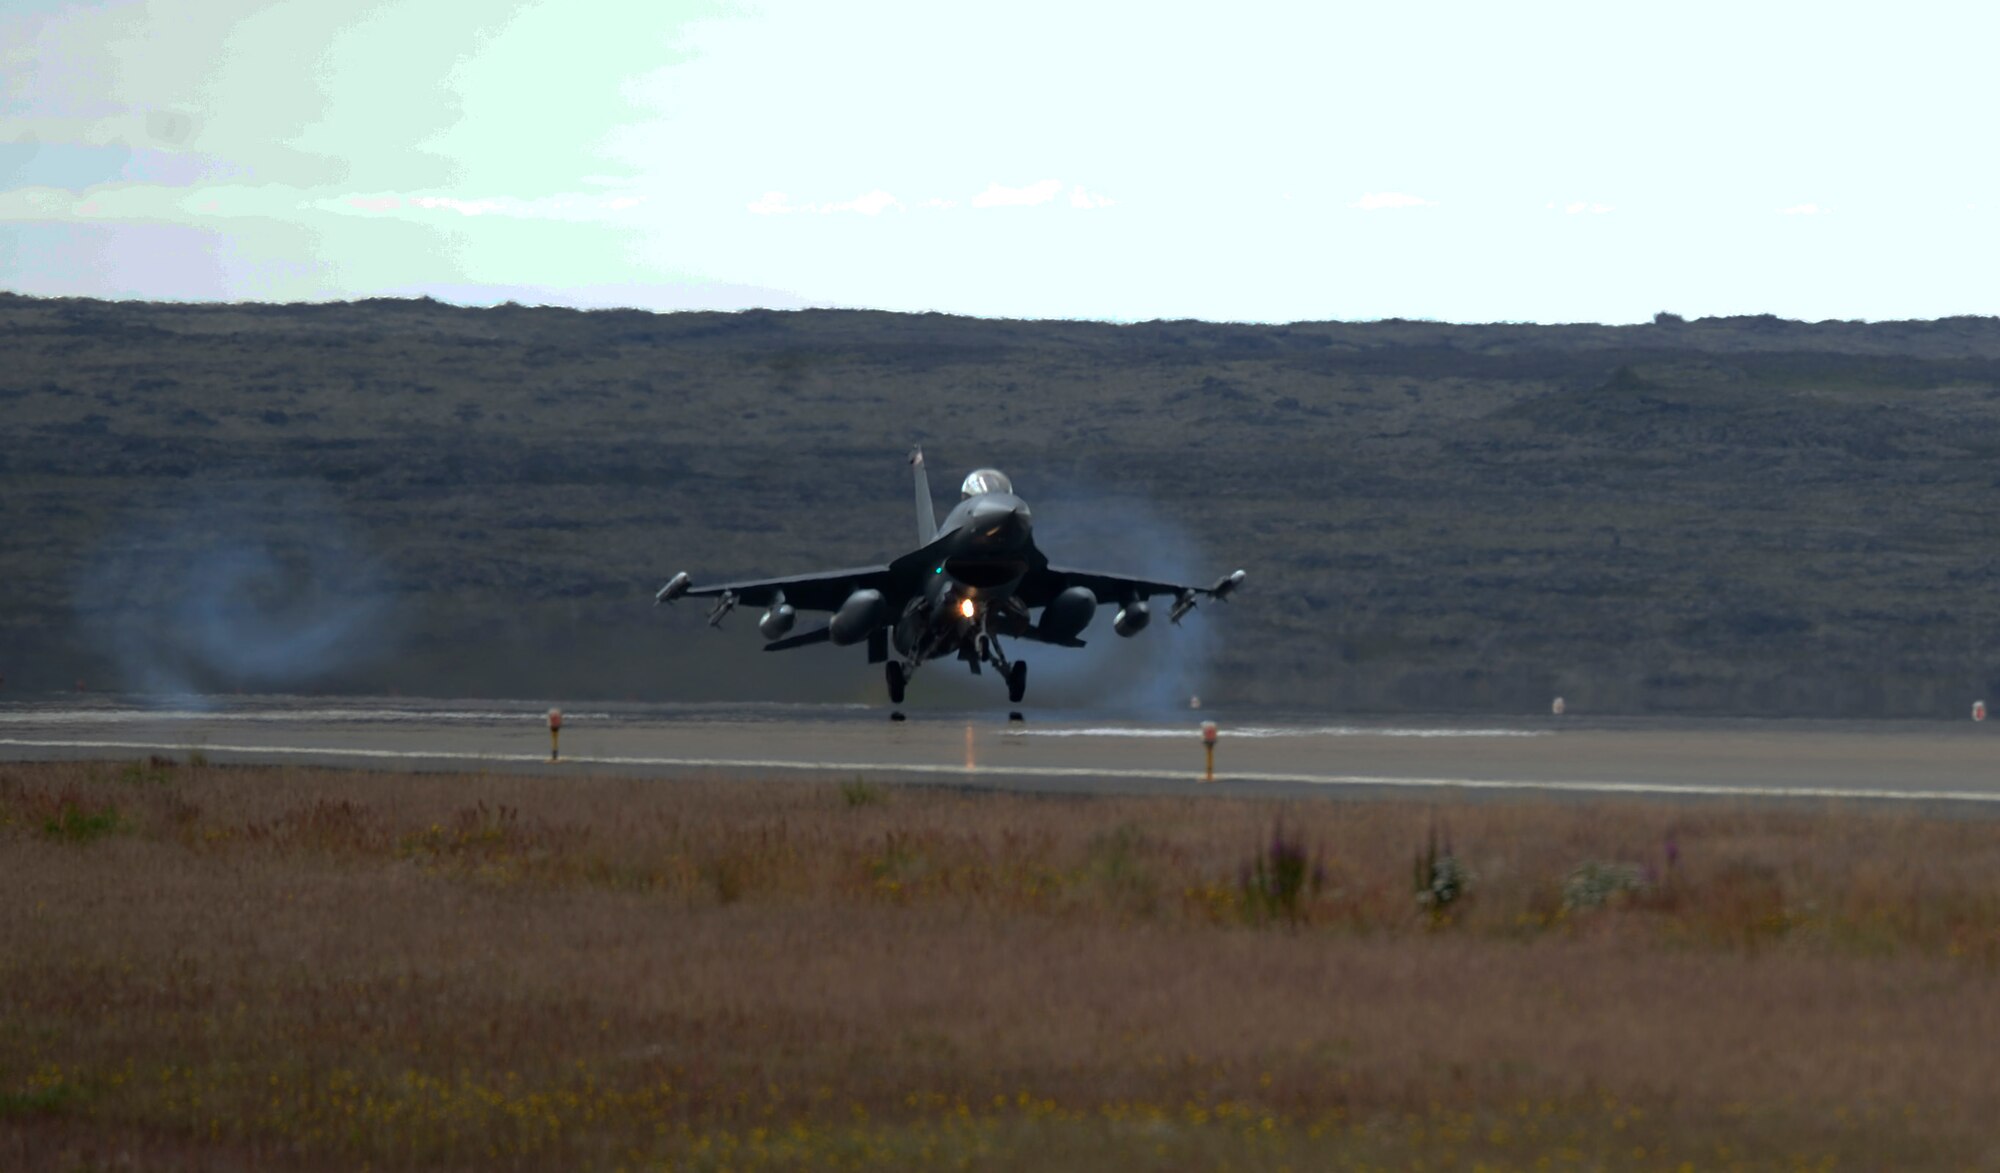 Over 100 Airmen and F-16 Fighting Falcons from the 480th Fighter Squadron, 52nd Fighter Wing, are in Iceland in support of NATO alliance commitments. Other NATO allies have also conducted this mission in the past, including: France, Denmark, and Italy.